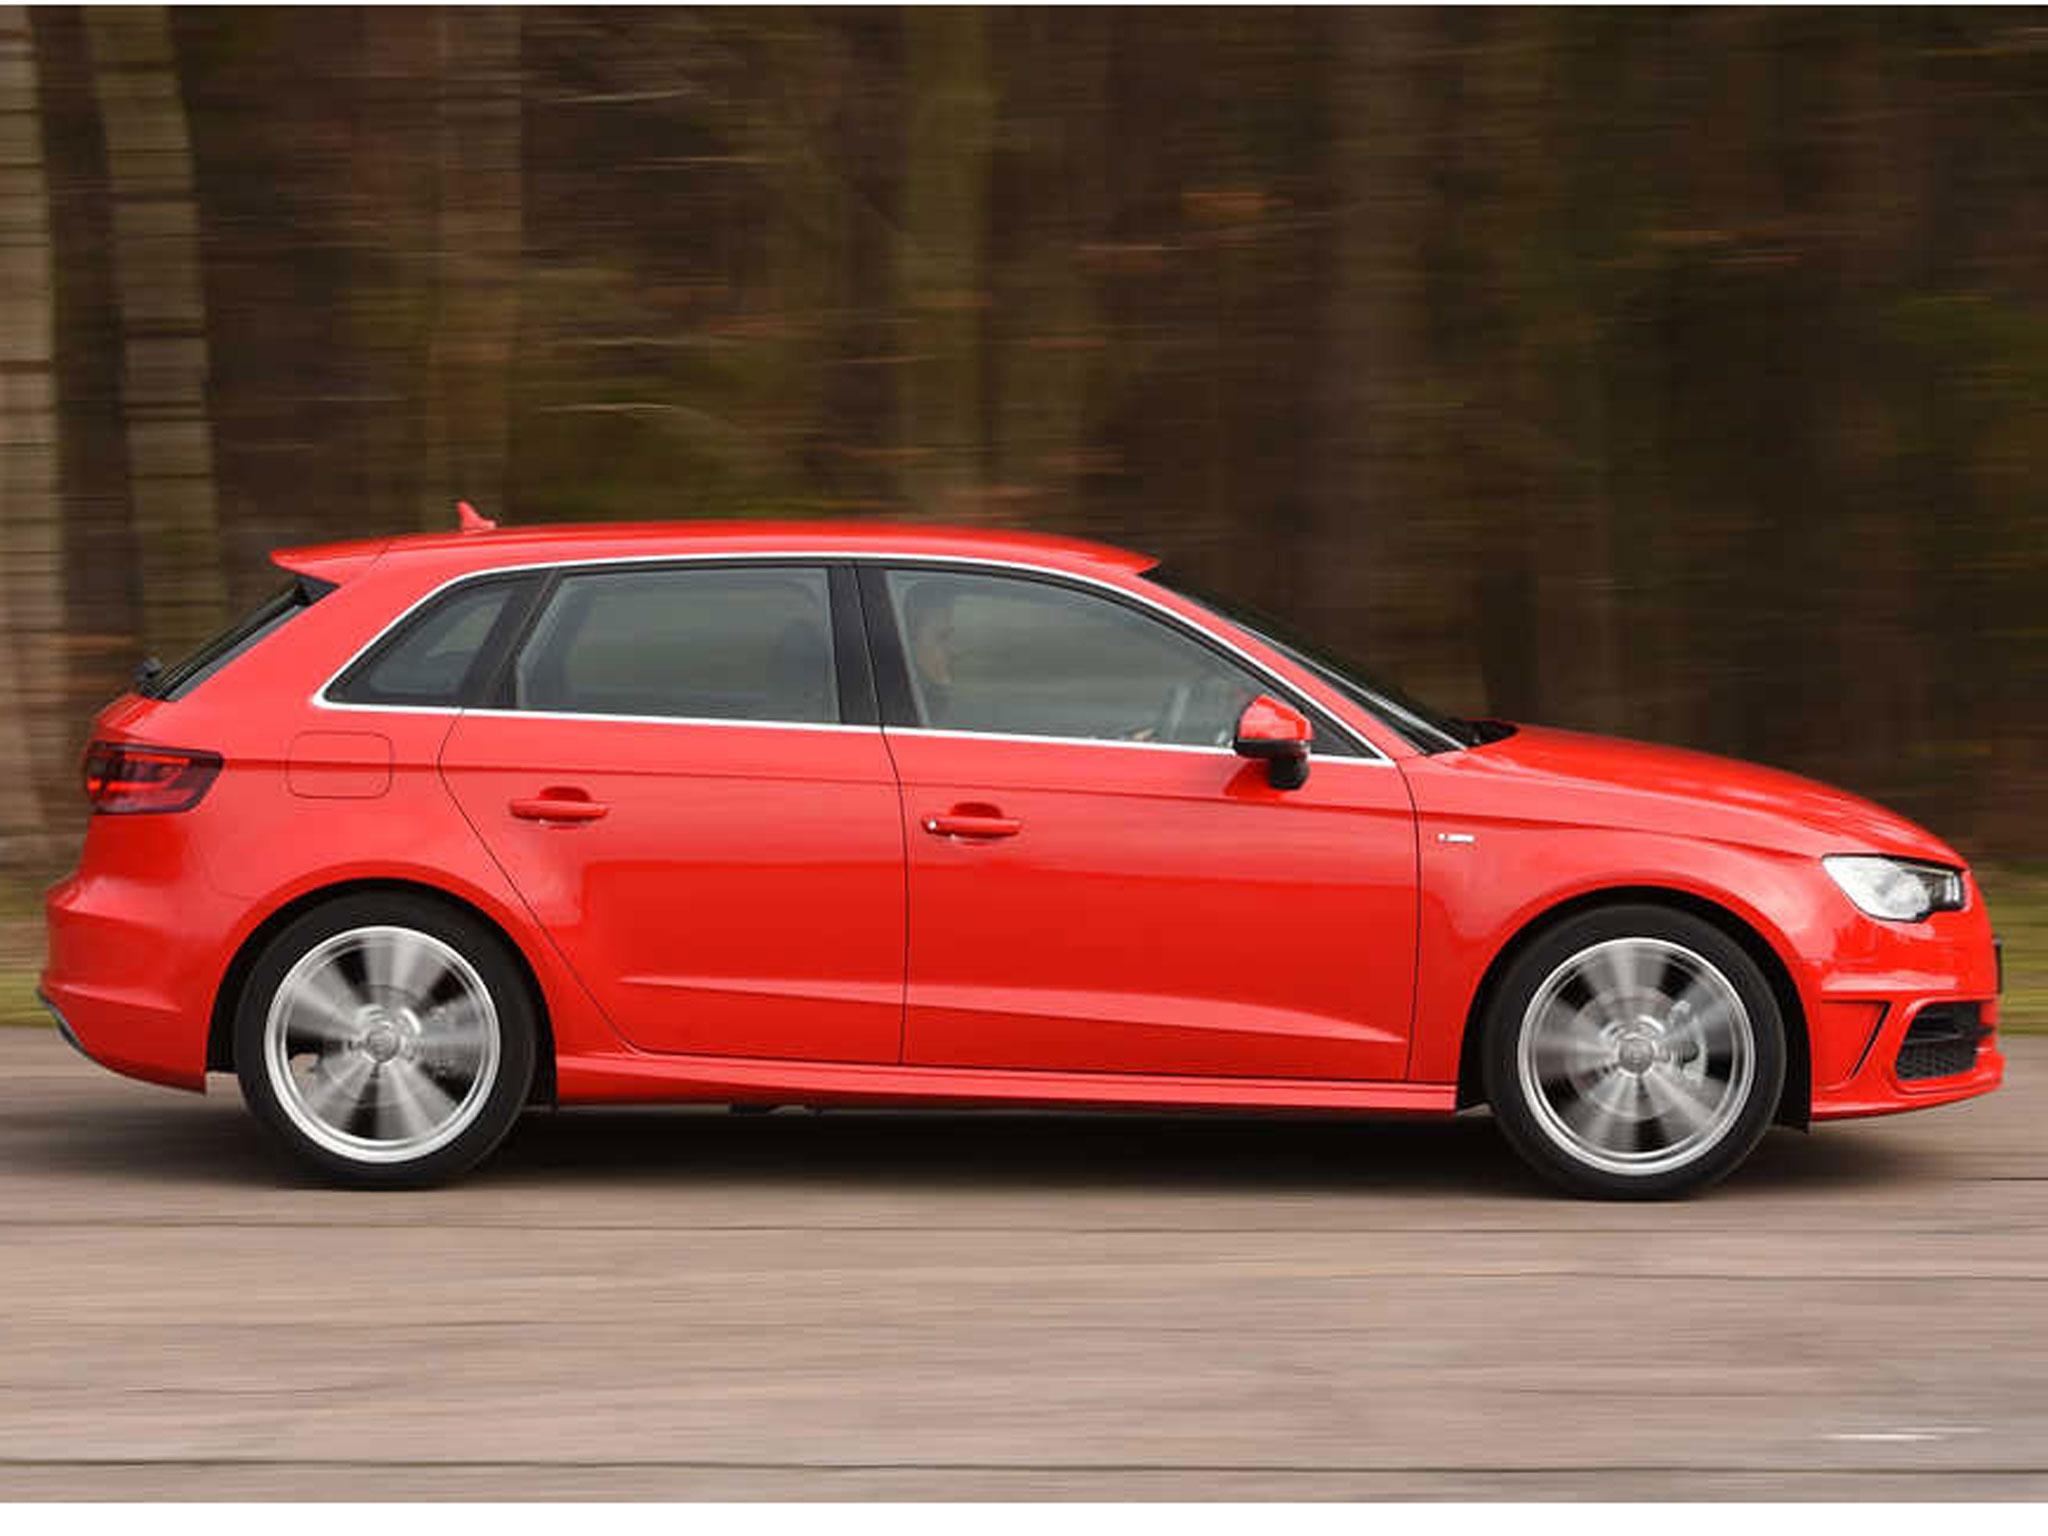 Our test A3’s Sport-spec ride is firm but never jarring